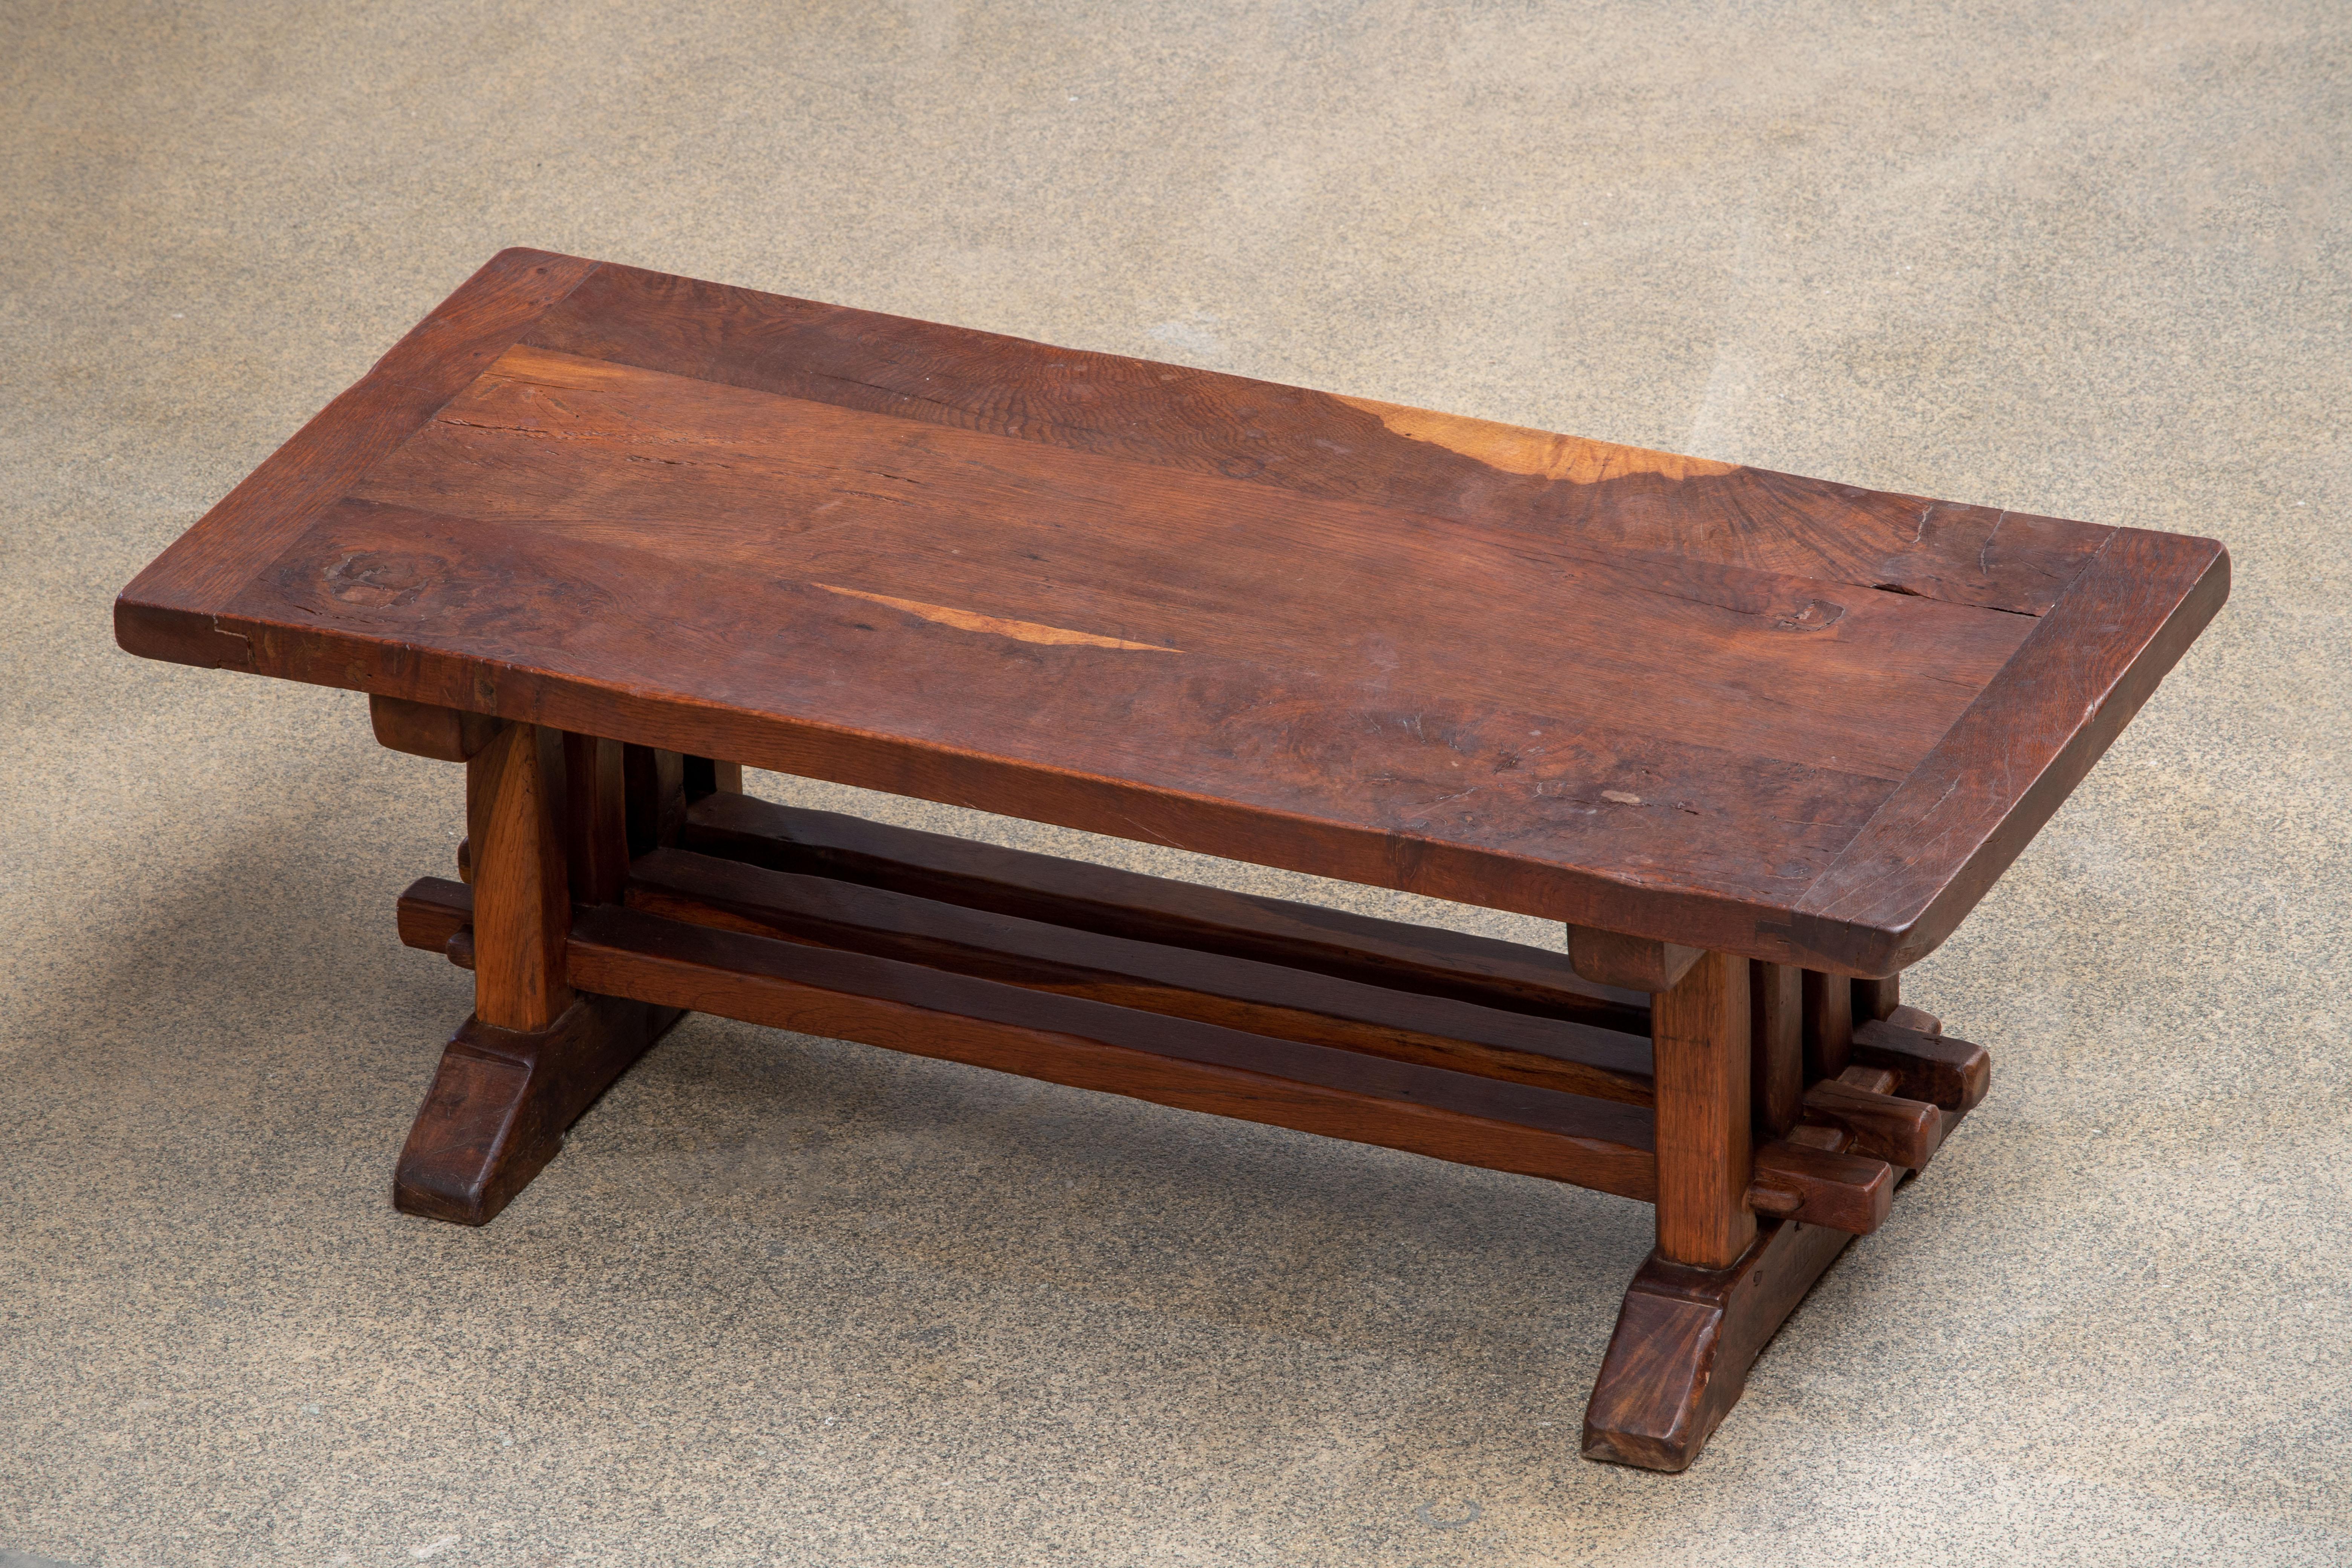 A 19th century French monastery coffee table handcrafted in Provence near Avignon of old growth French oak, circa 1890s. This impressive low table retains its beautiful rich color and patina.